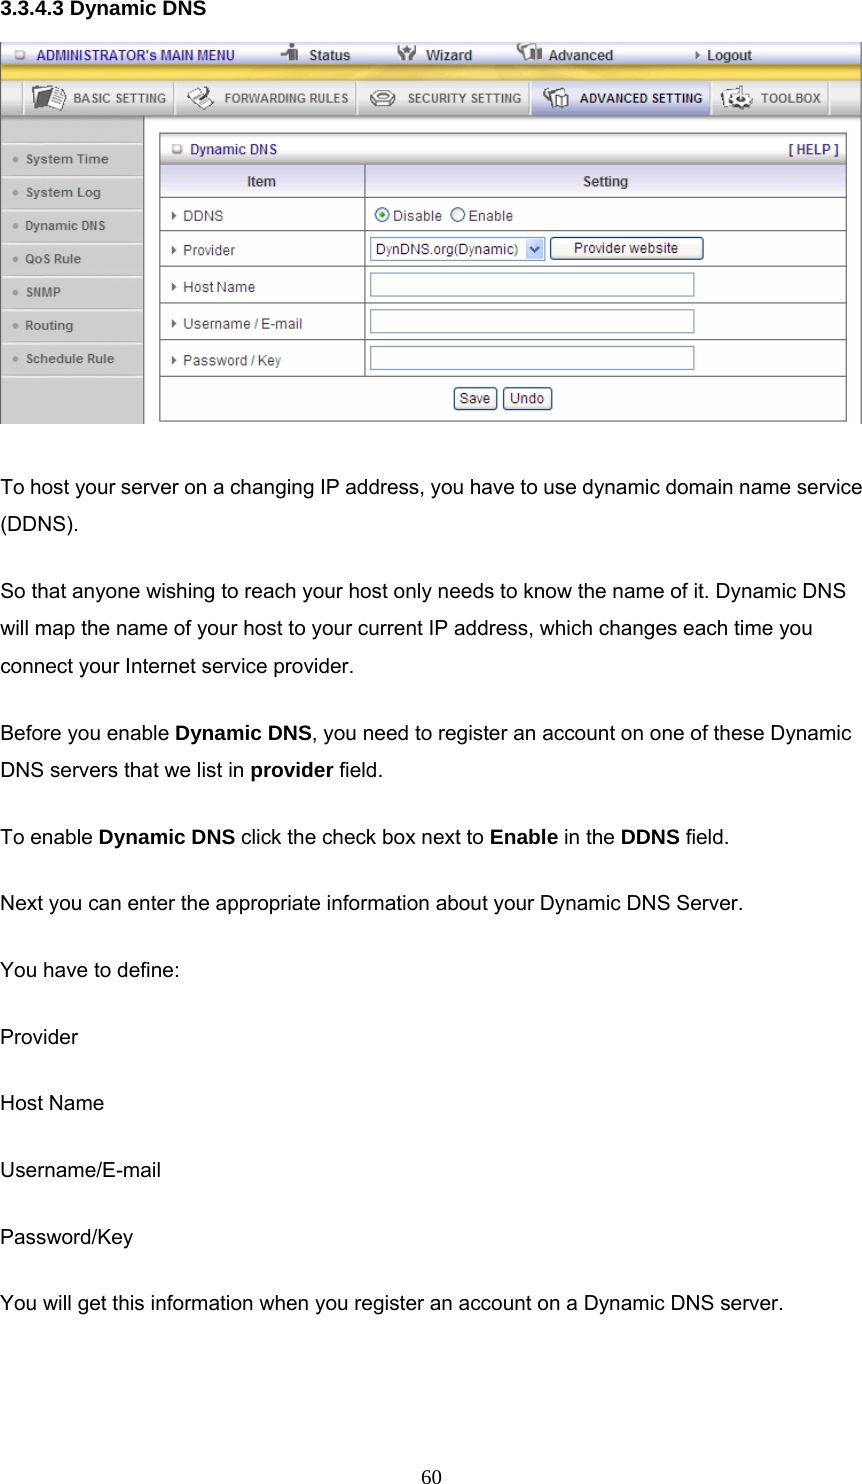  603.3.4.3 Dynamic DNS  To host your server on a changing IP address, you have to use dynamic domain name service (DDNS).  So that anyone wishing to reach your host only needs to know the name of it. Dynamic DNS will map the name of your host to your current IP address, which changes each time you connect your Internet service provider.   Before you enable Dynamic DNS, you need to register an account on one of these Dynamic DNS servers that we list in provider field.   To enable Dynamic DNS click the check box next to Enable in the DDNS field. Next you can enter the appropriate information about your Dynamic DNS Server. You have to define: Provider Host Name Username/E-mail Password/Key You will get this information when you register an account on a Dynamic DNS server.  